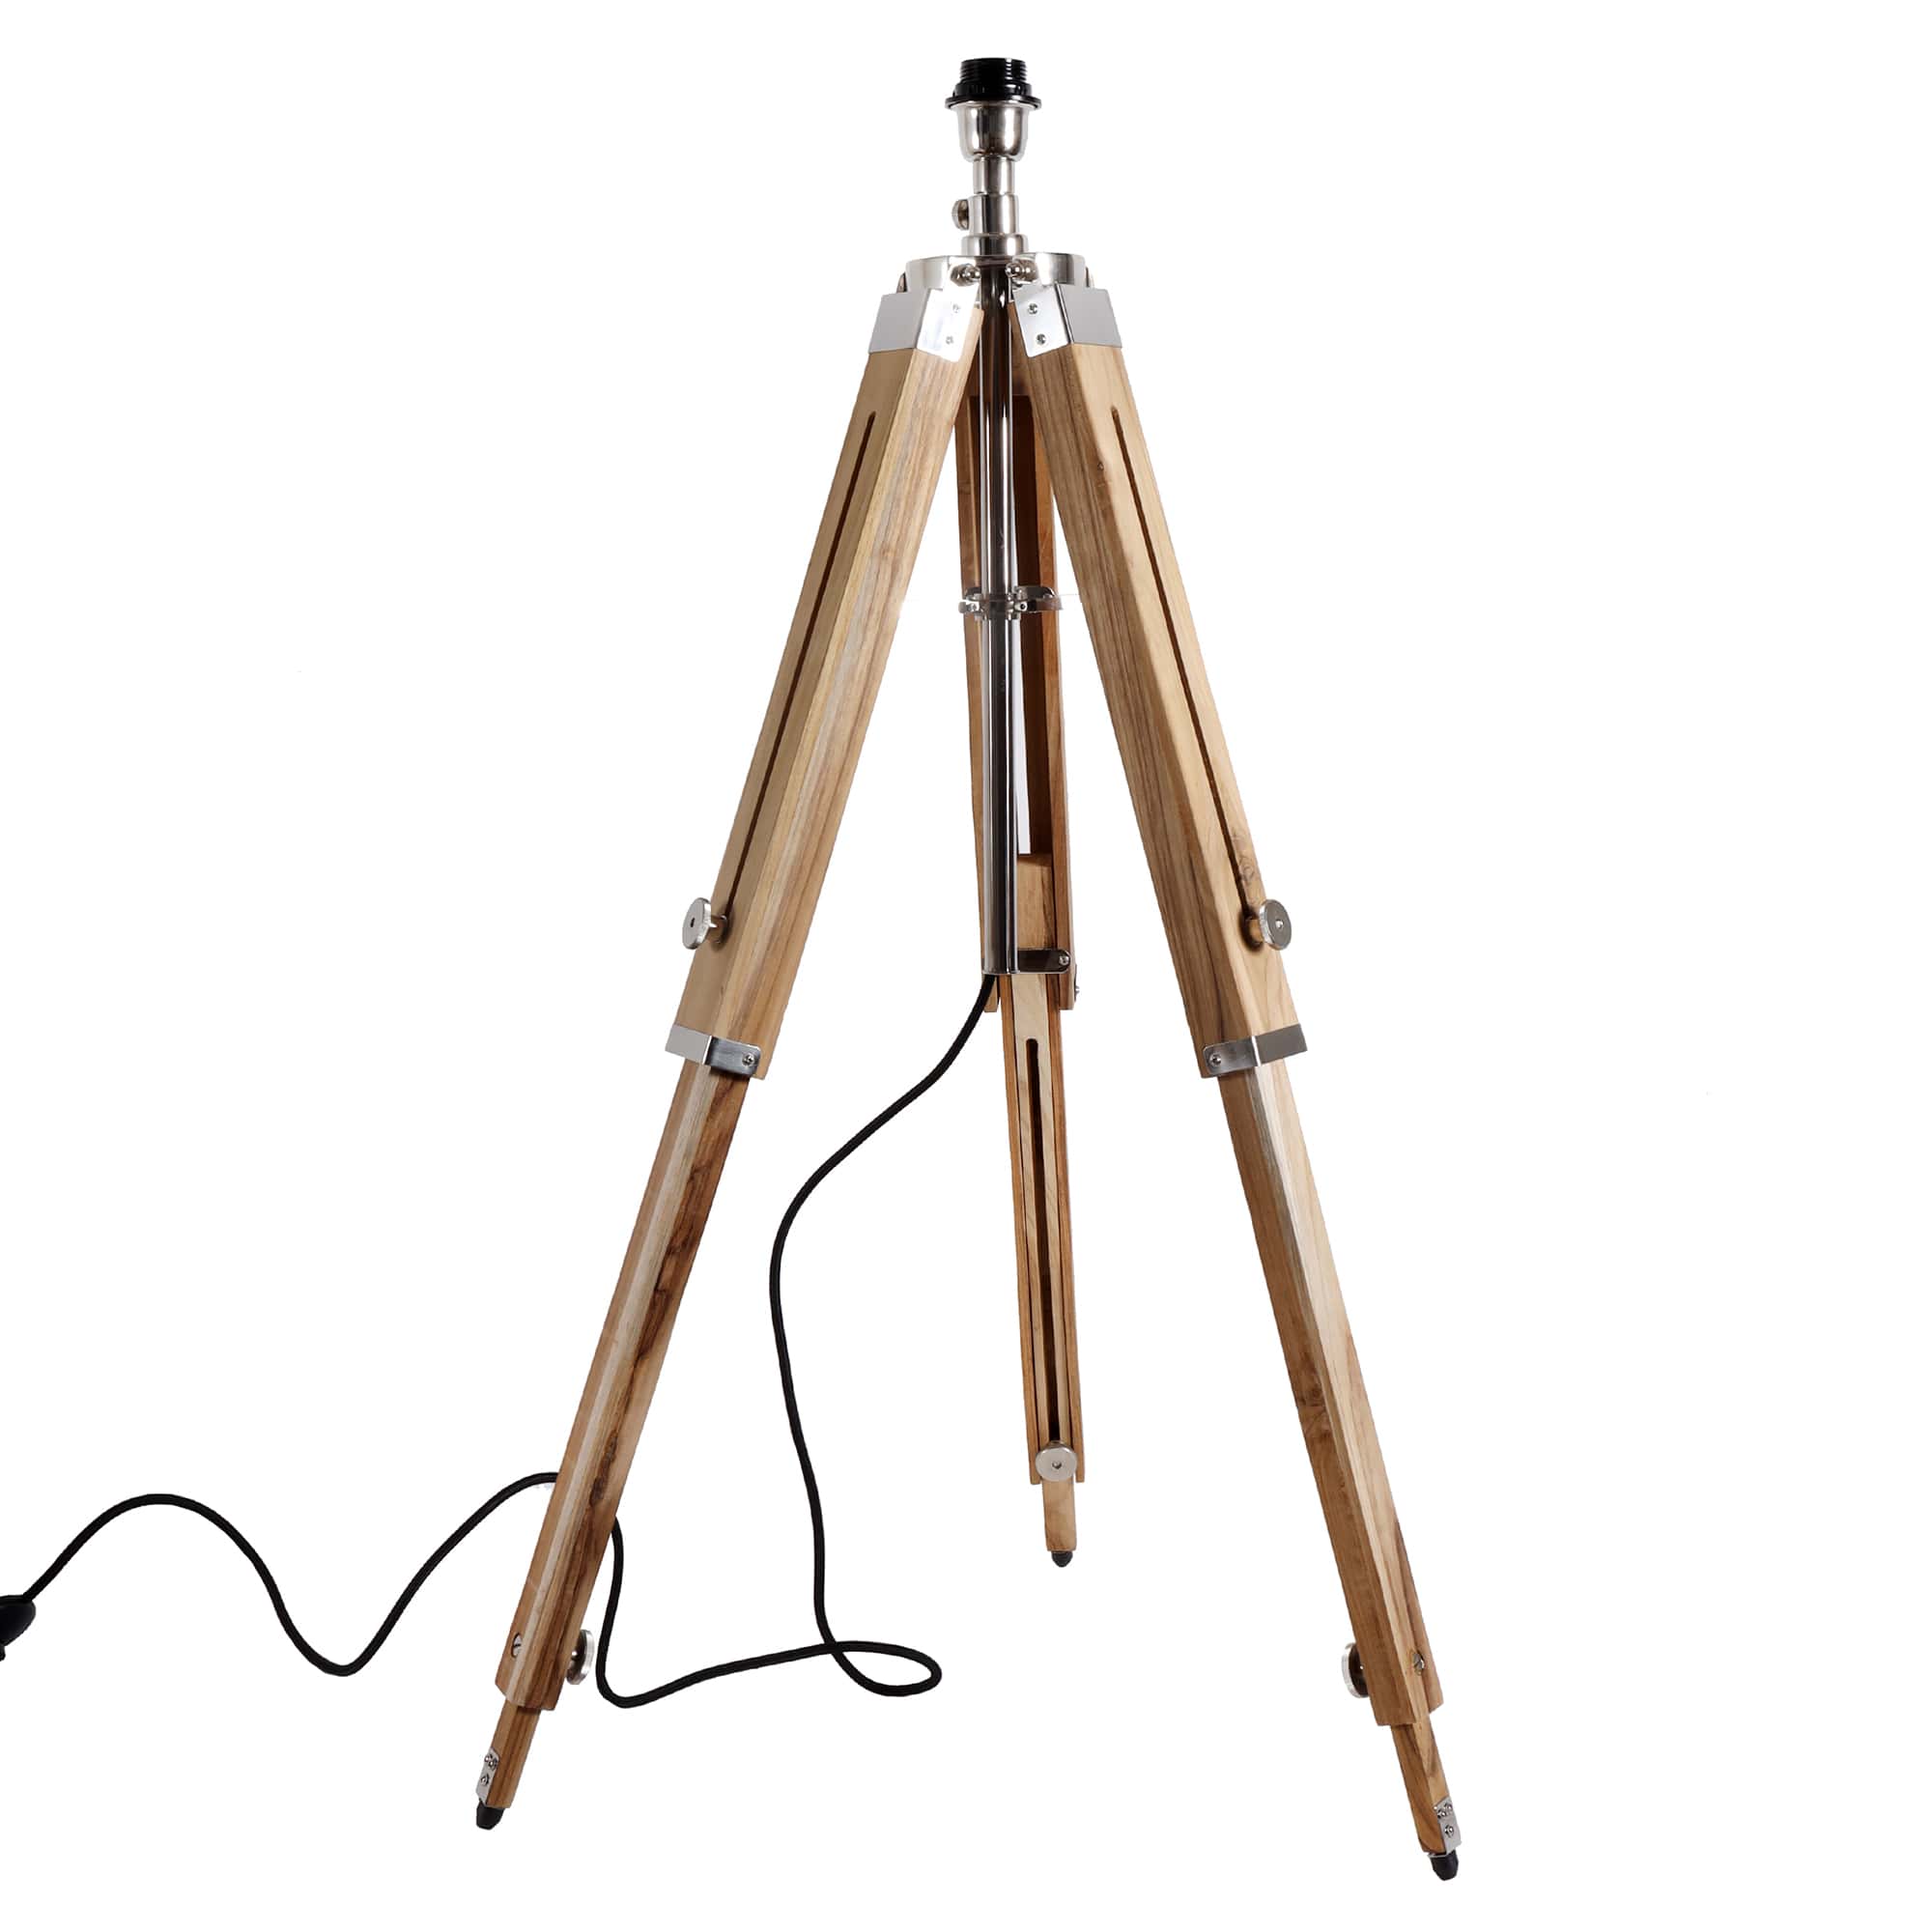 tripod floor lamp made from natural wood with nickel details. It has adjustable legs and neck which allows you to fully customise the height ,with legs fully extended